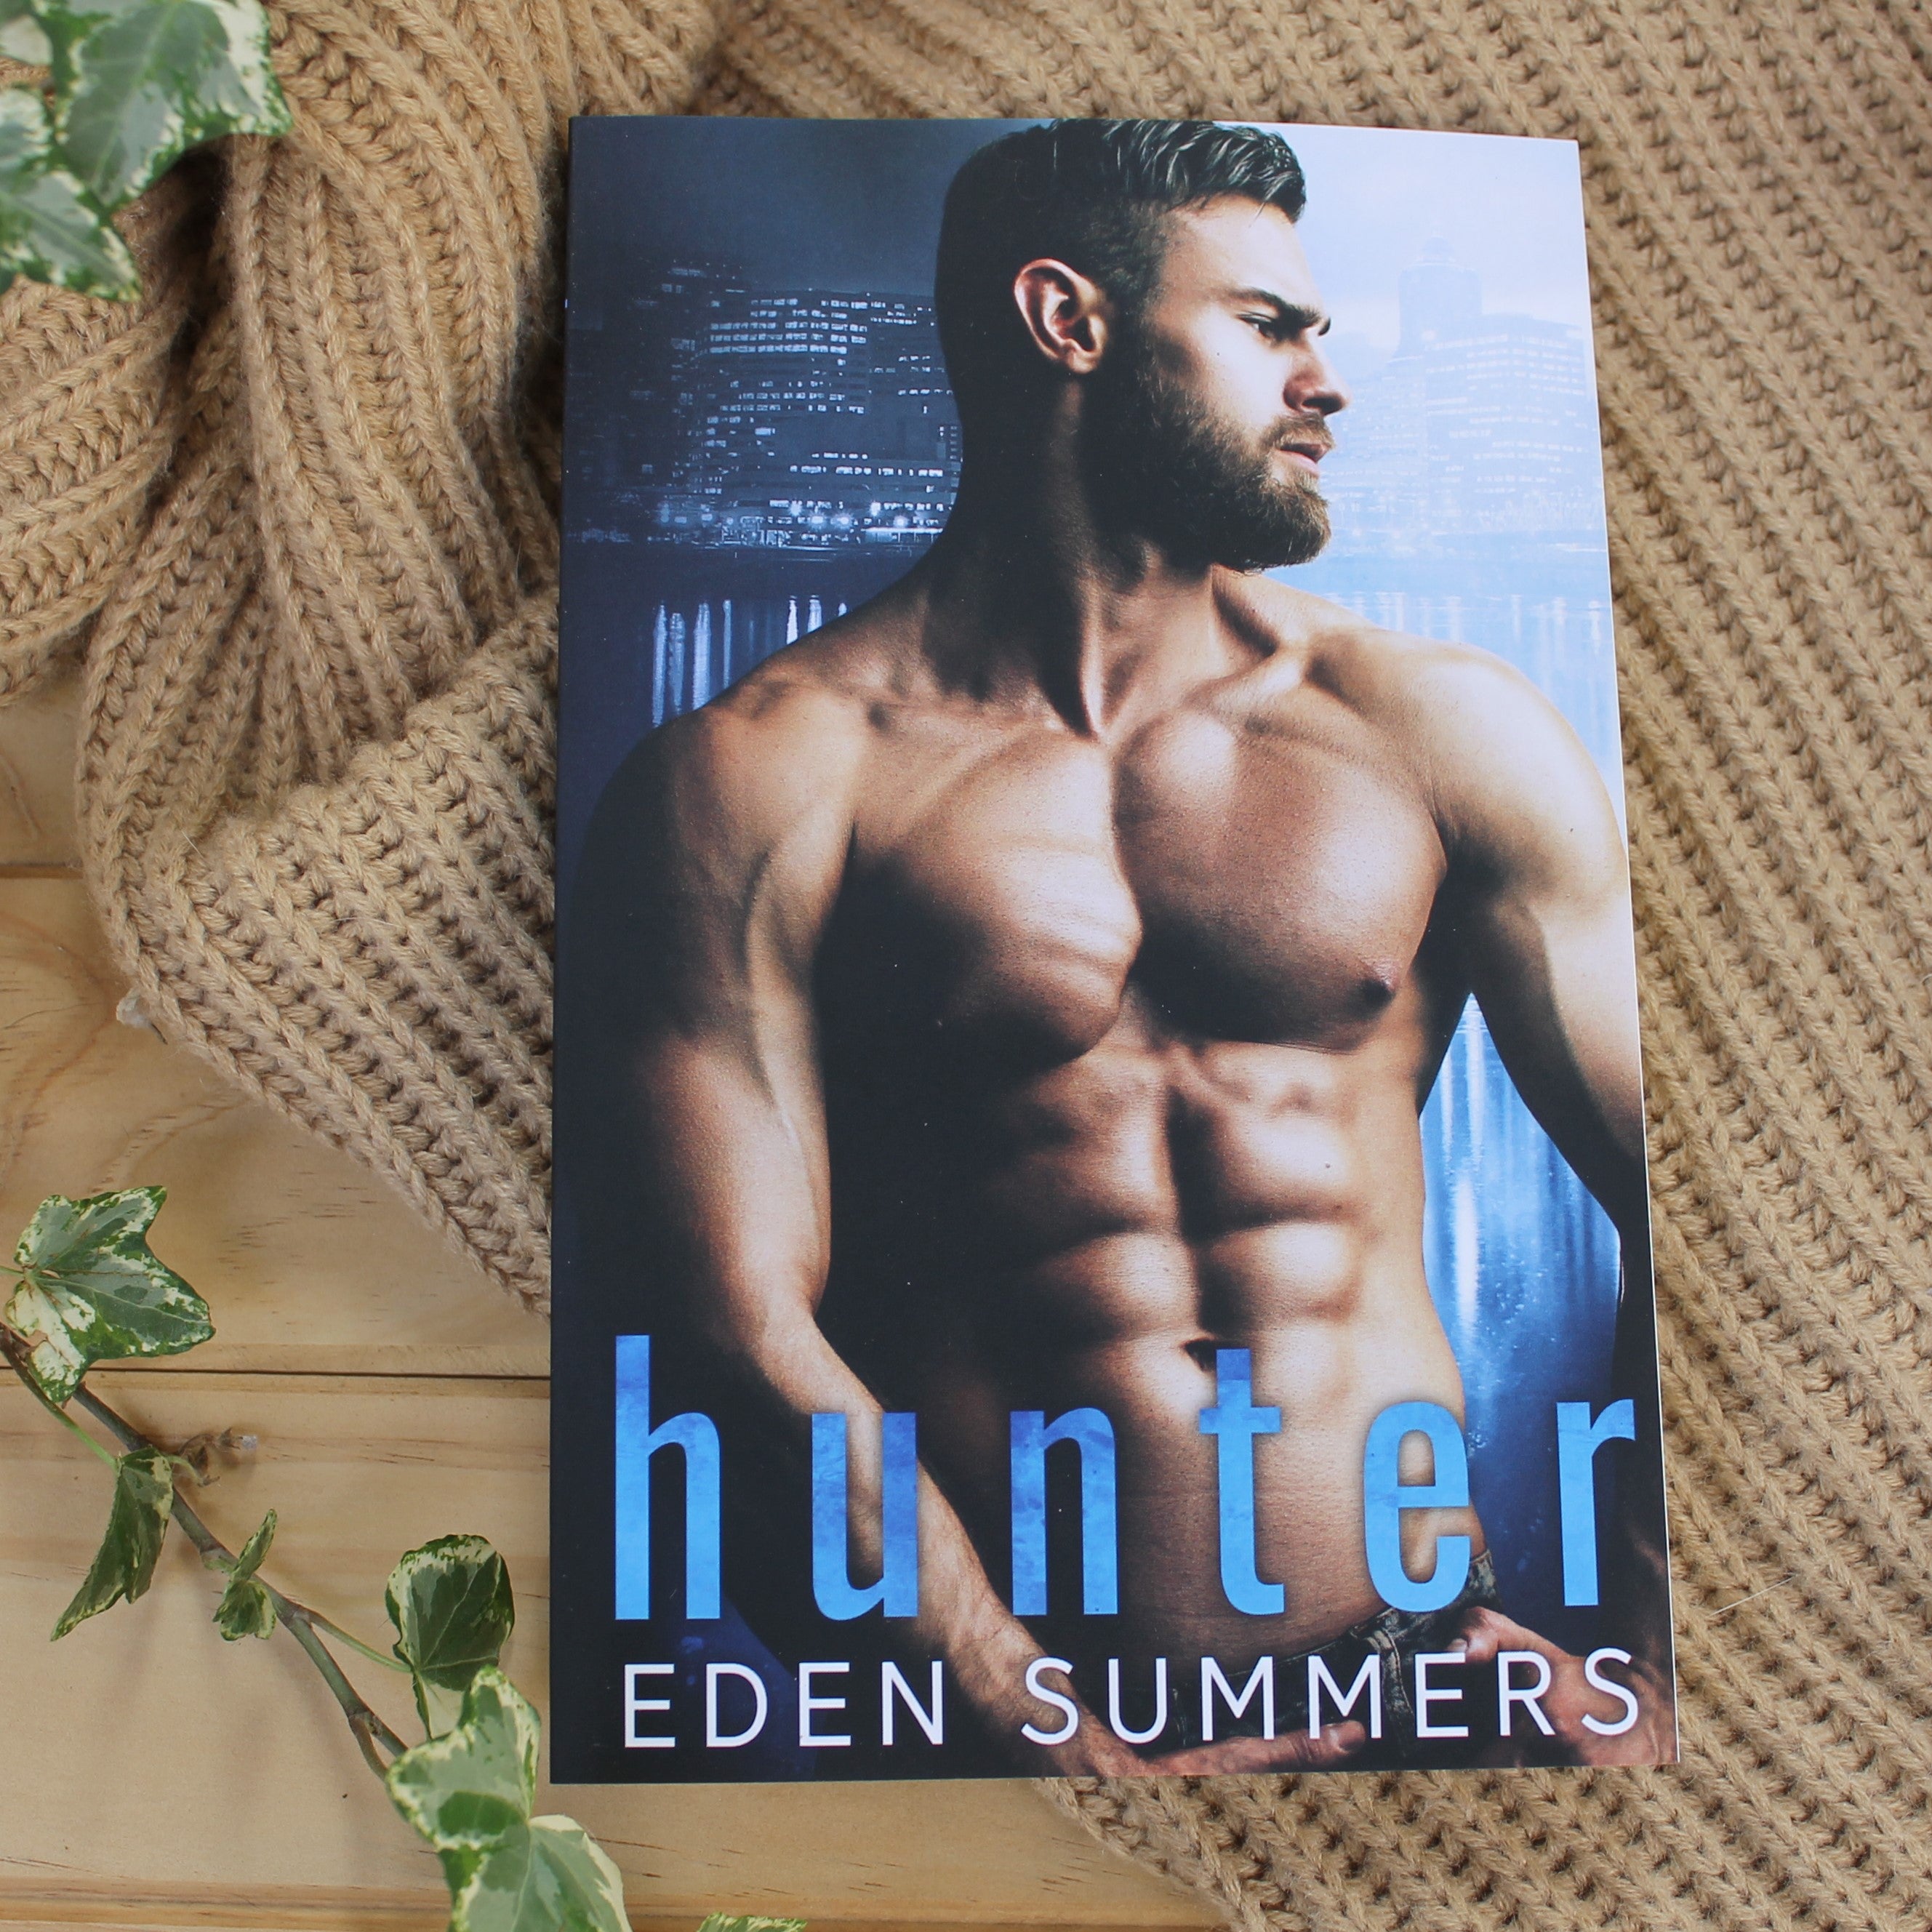 Hunting Her series by Eden Summers